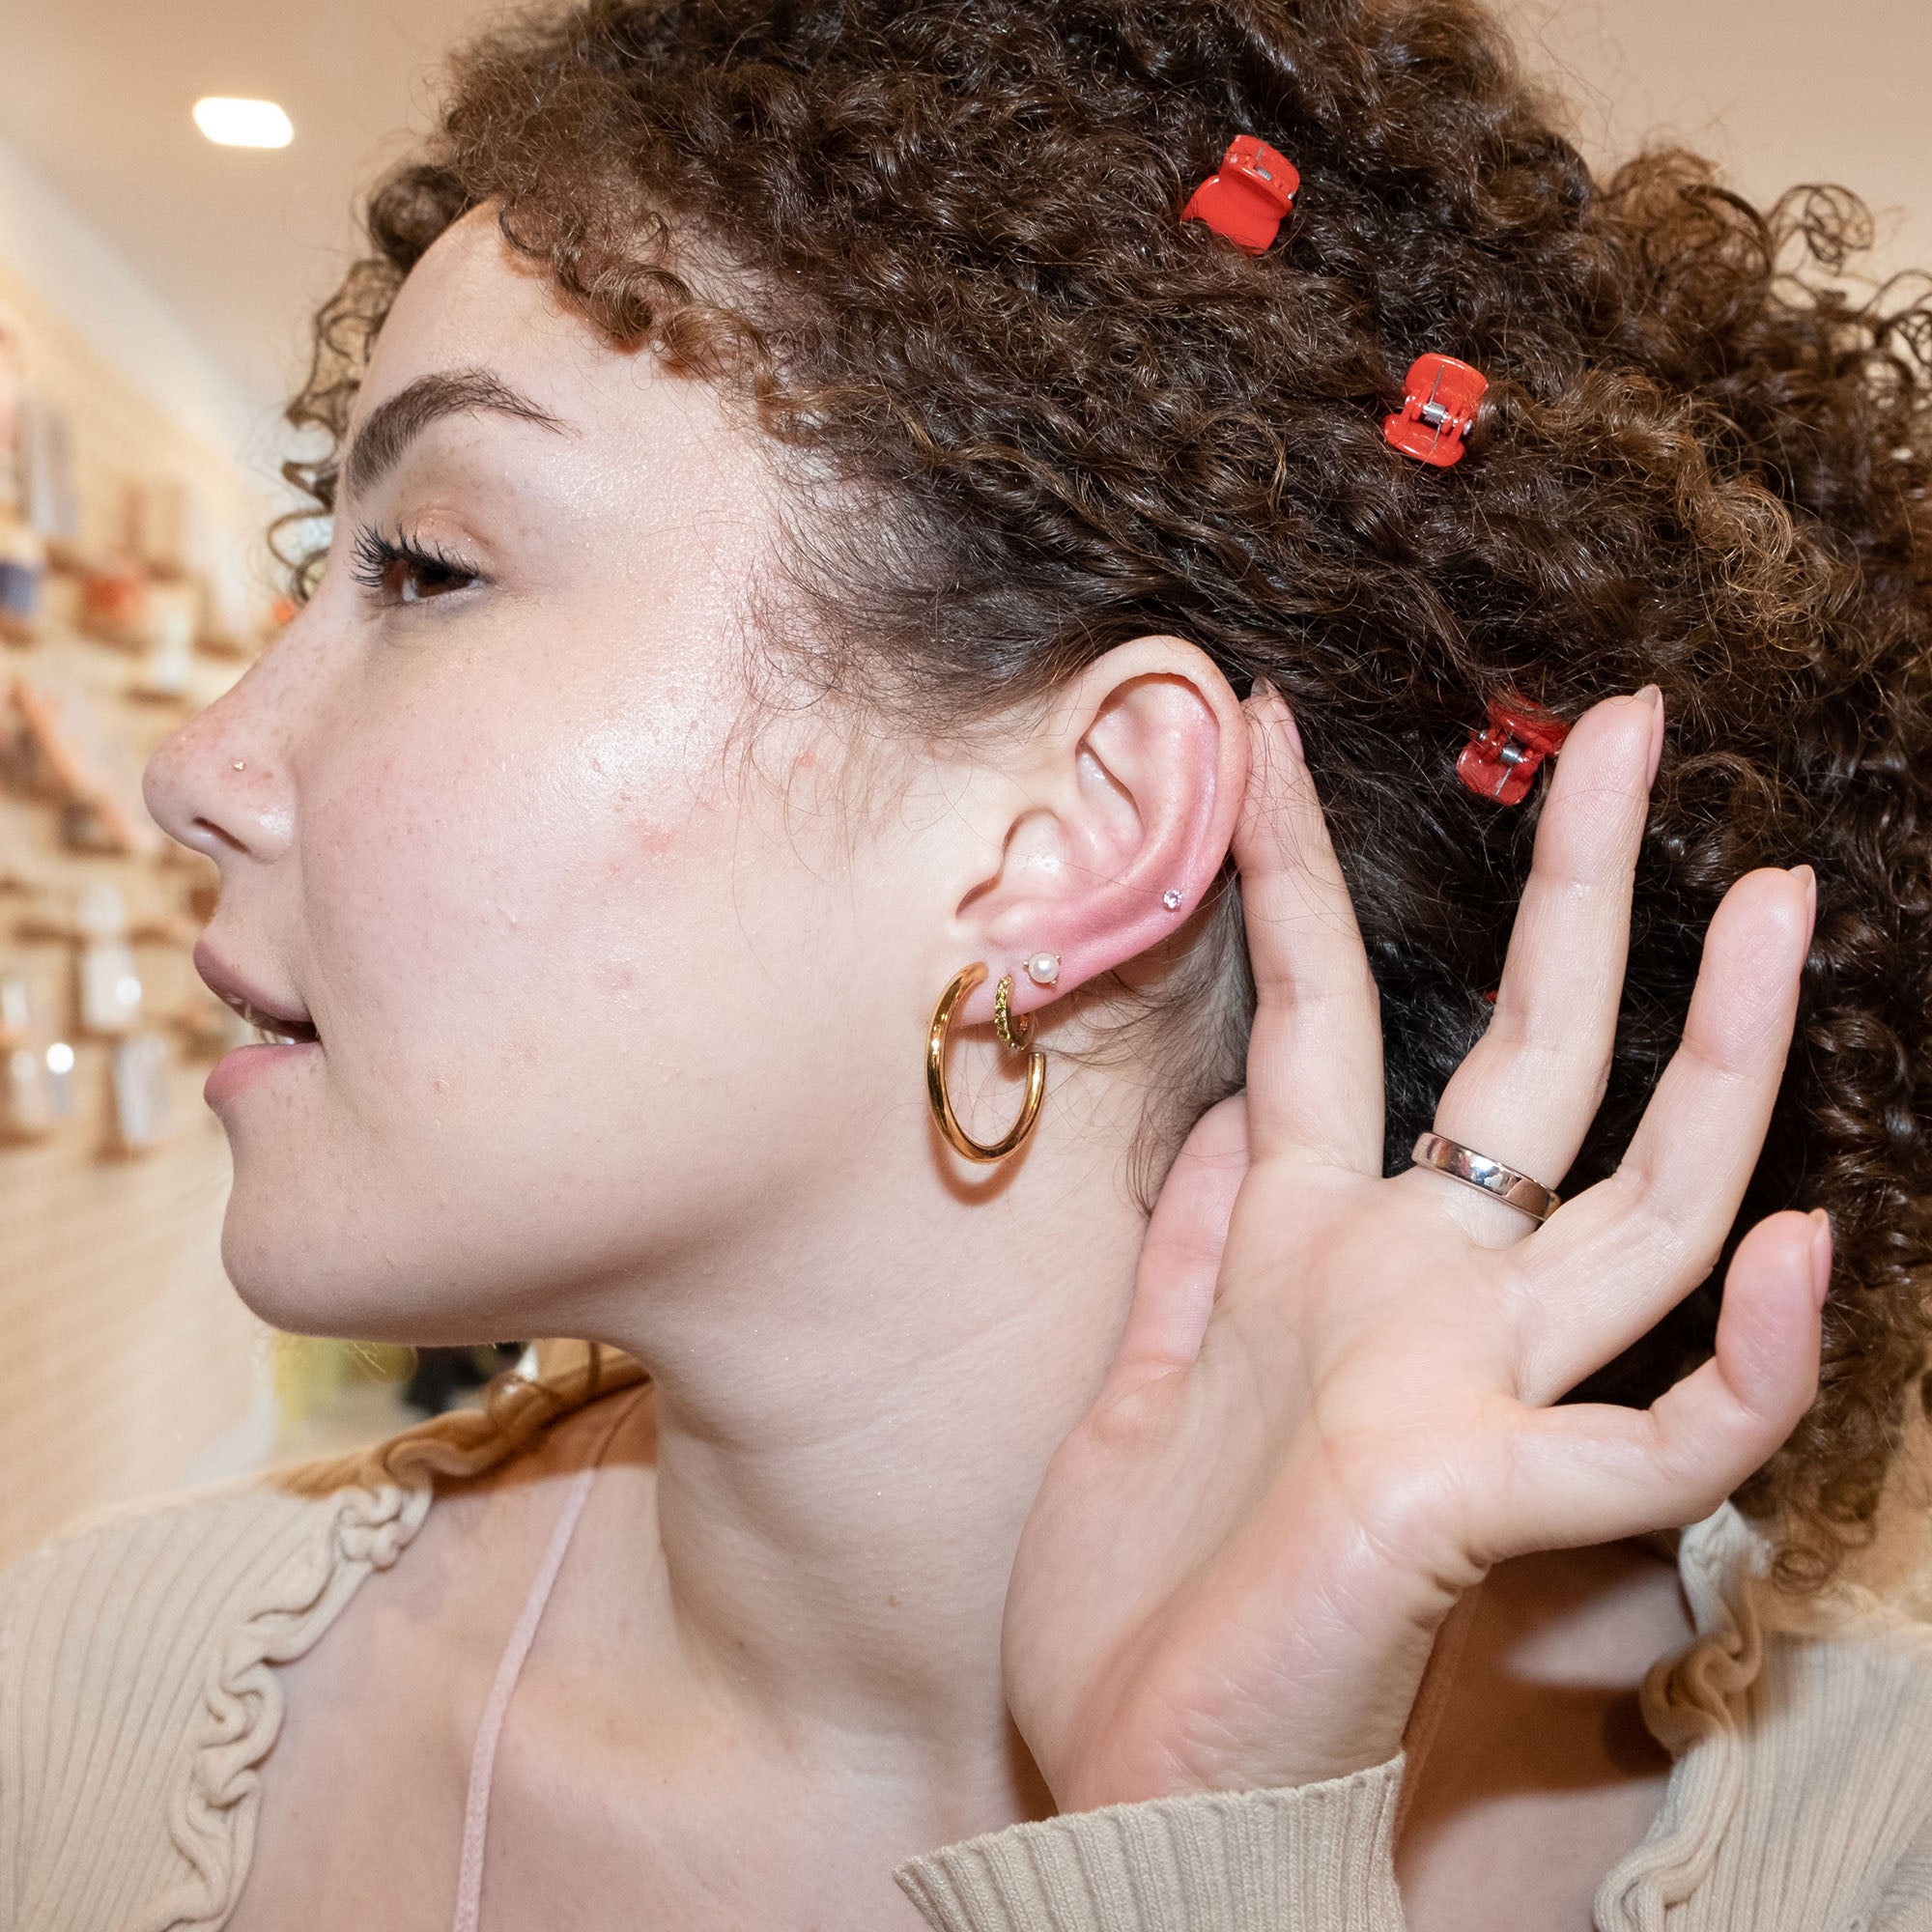 Allergic to Earrings? Here’s What You Need to Know